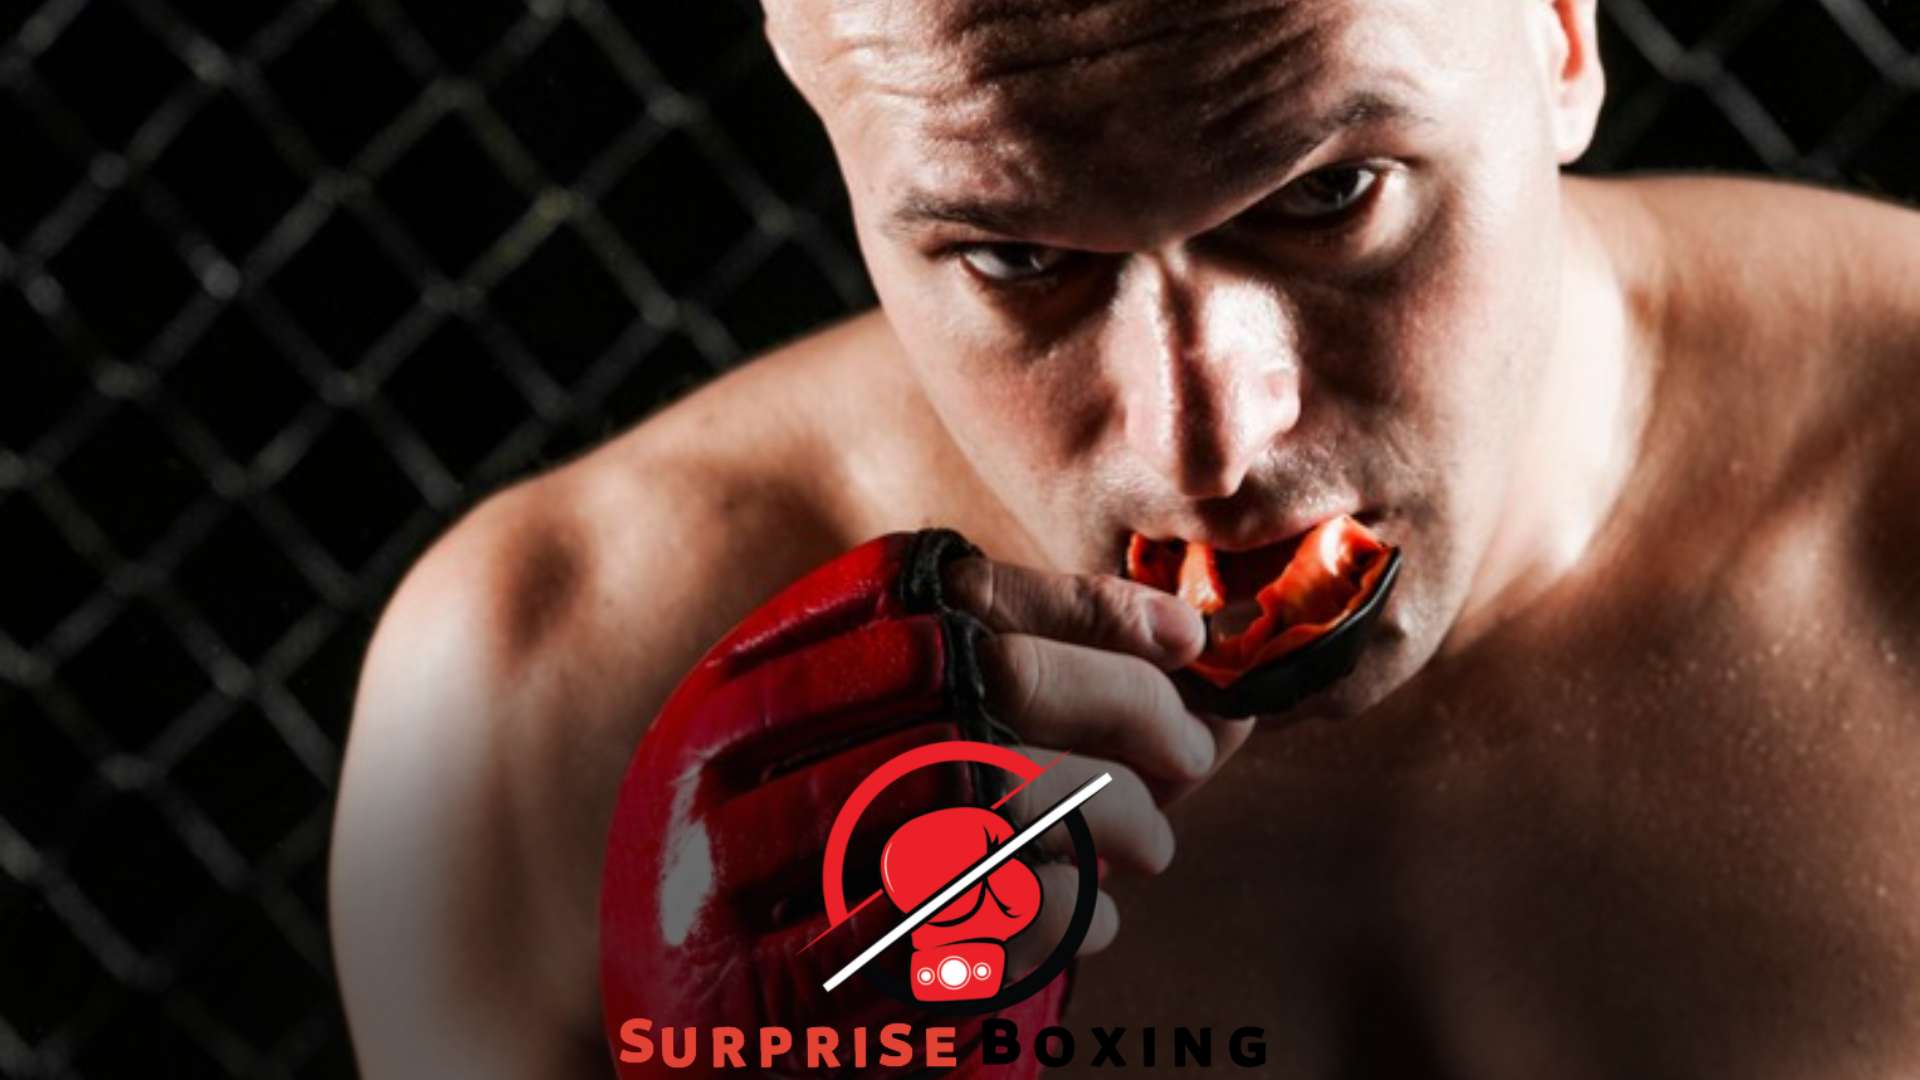 How to Use a Mouthguard for Boxing Safely